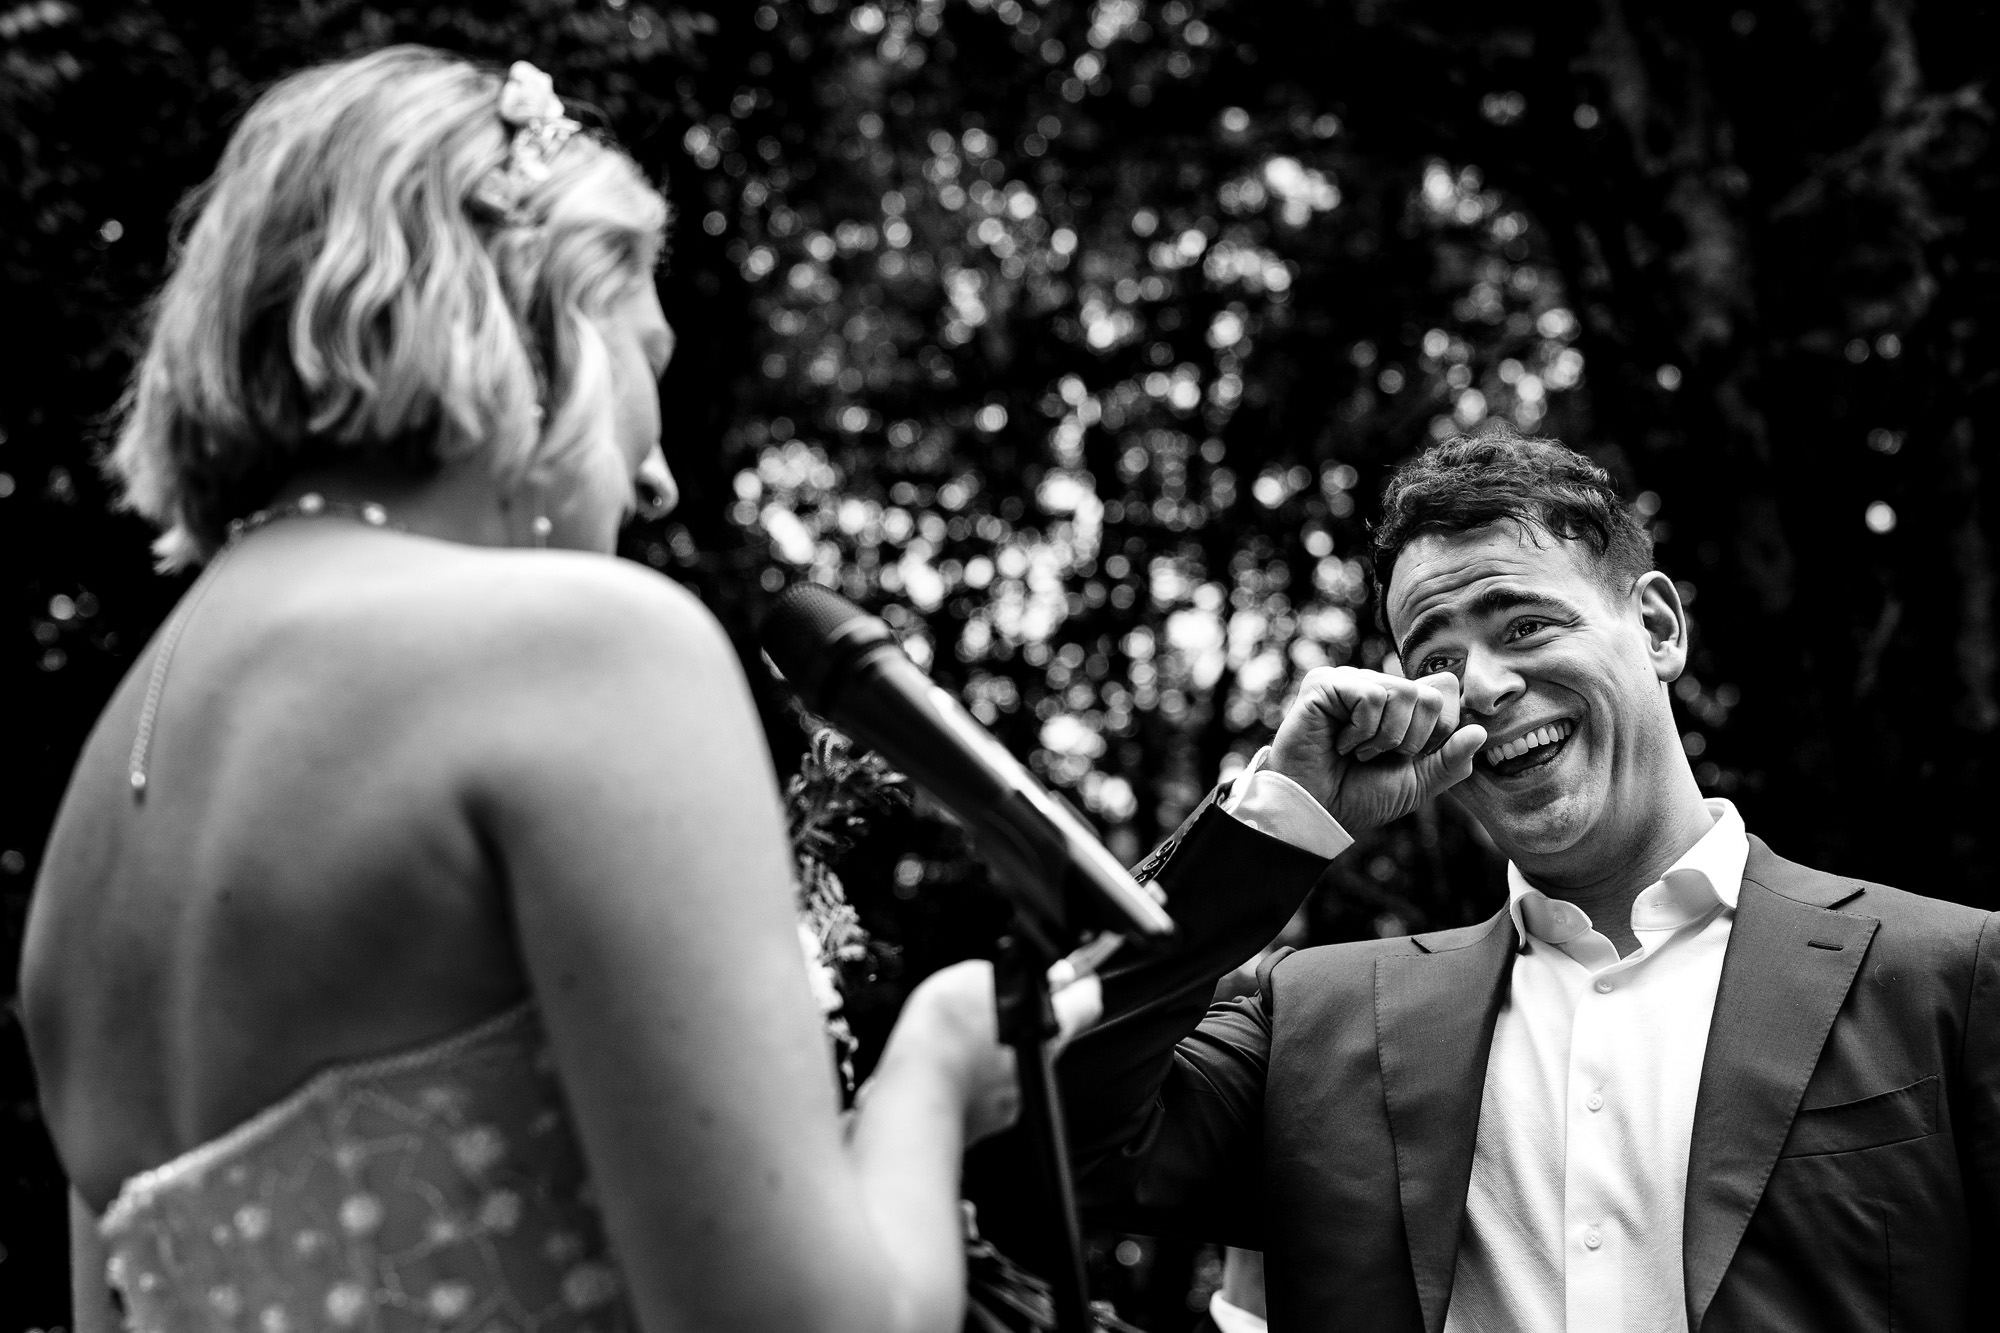 A groom cries during his wedding ceremony.